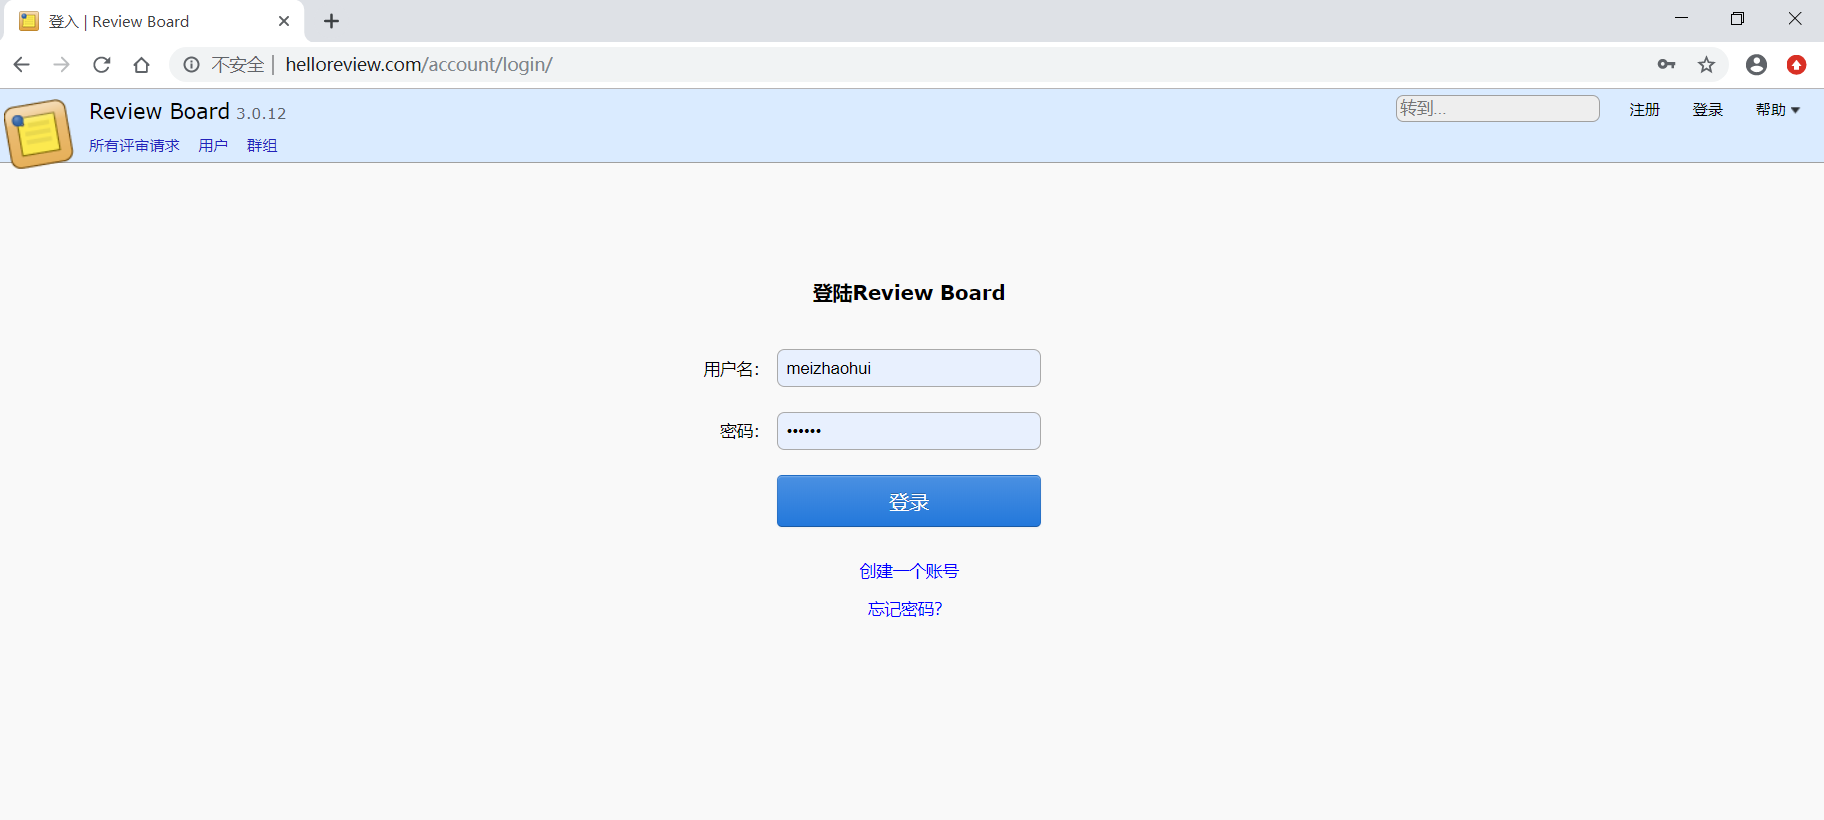 _images/reviewboard_default_login_page_i18n_chinese.png